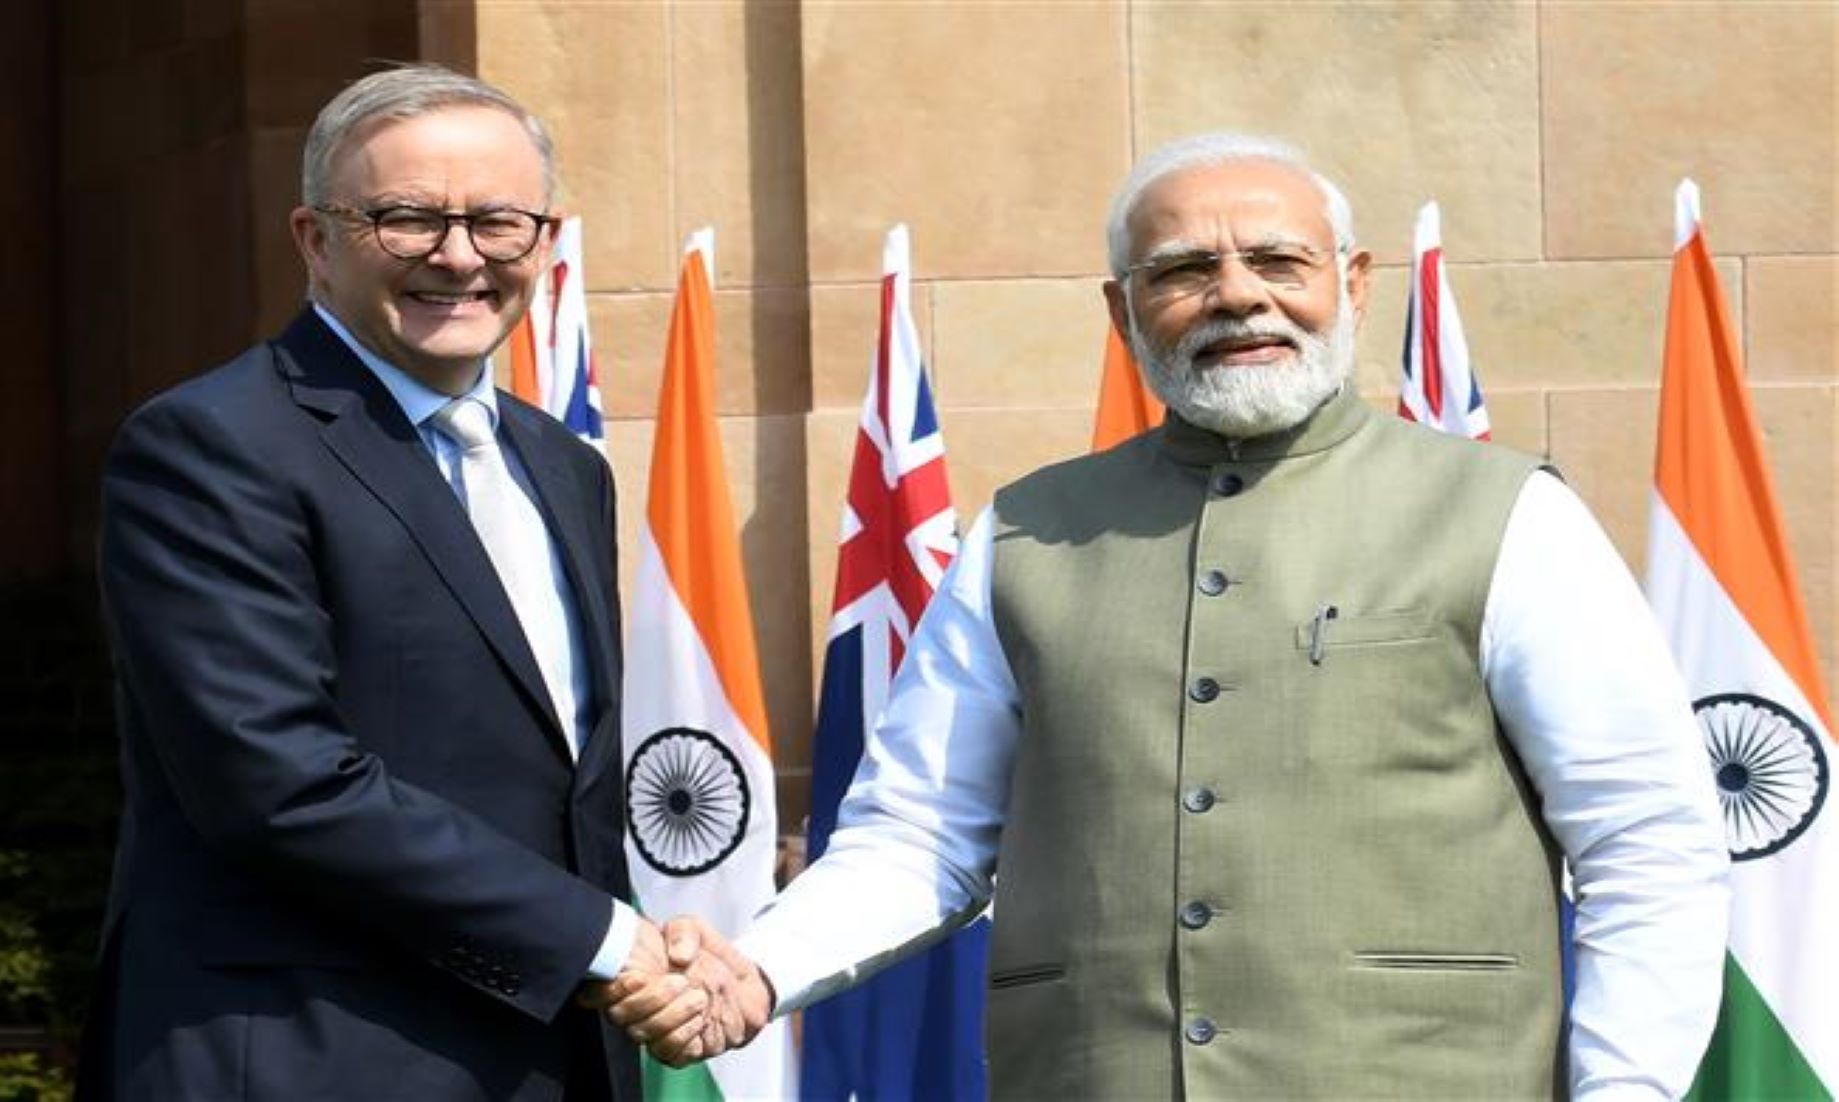 India, Australia Signed Pacts On Sports, Audio-Visual Co-Production